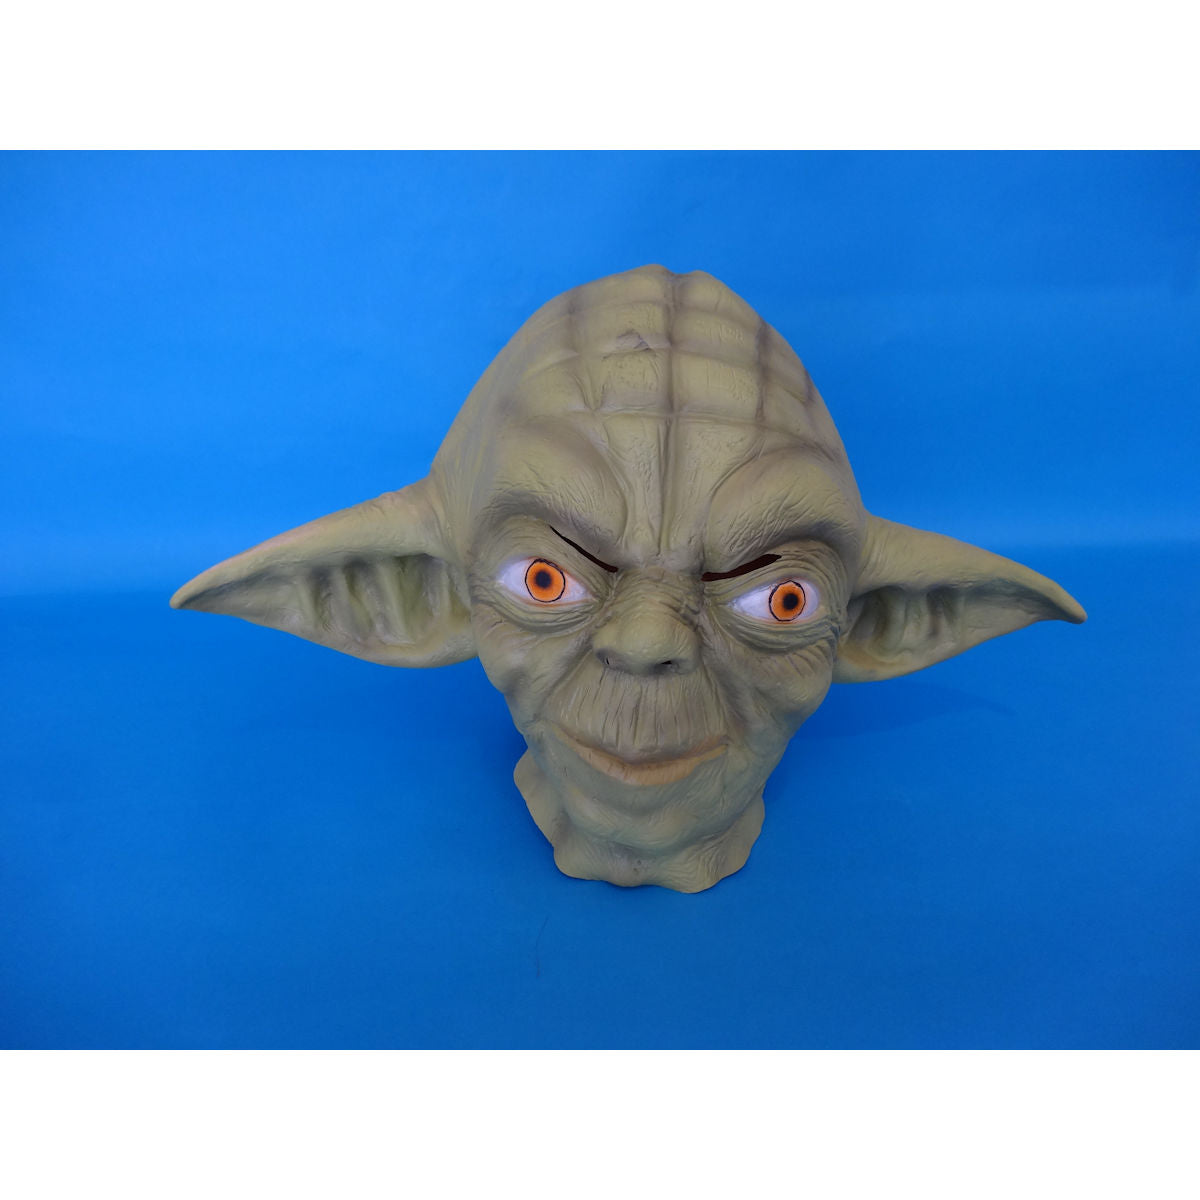 Master Yoda Star Wars Latex Mask High Quality Deluxe Mask